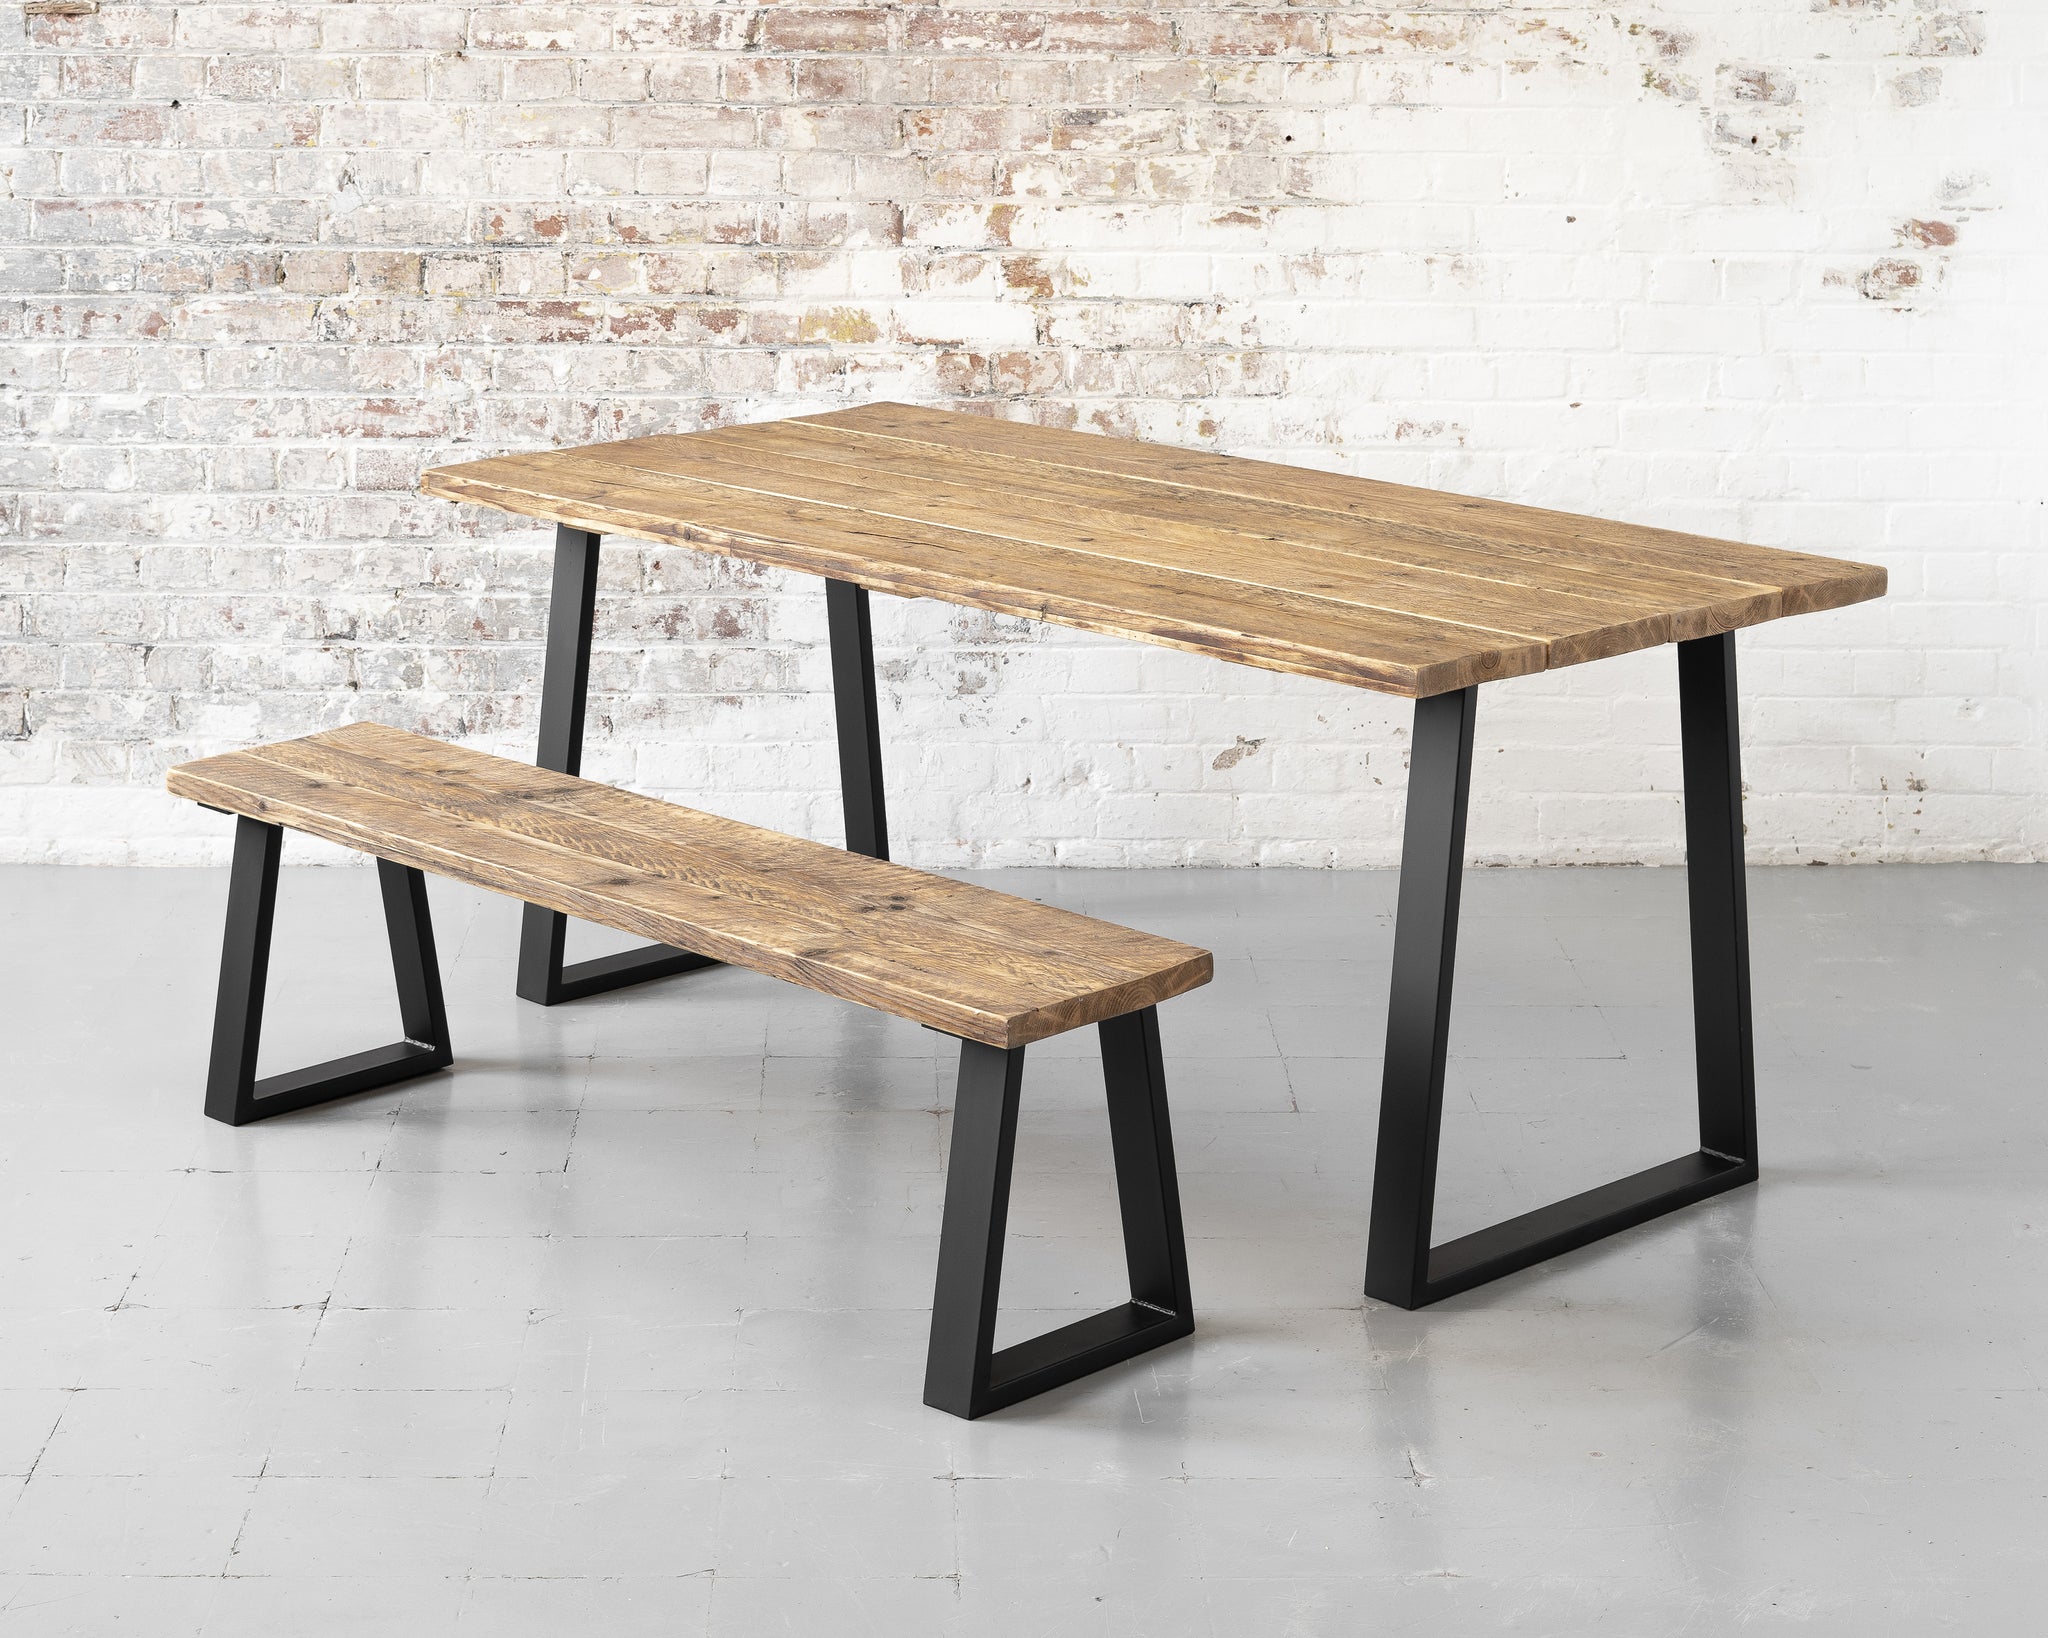 Rustic, industrial, reclaimed timber scaffold board dining table on matte black steel trapezium base